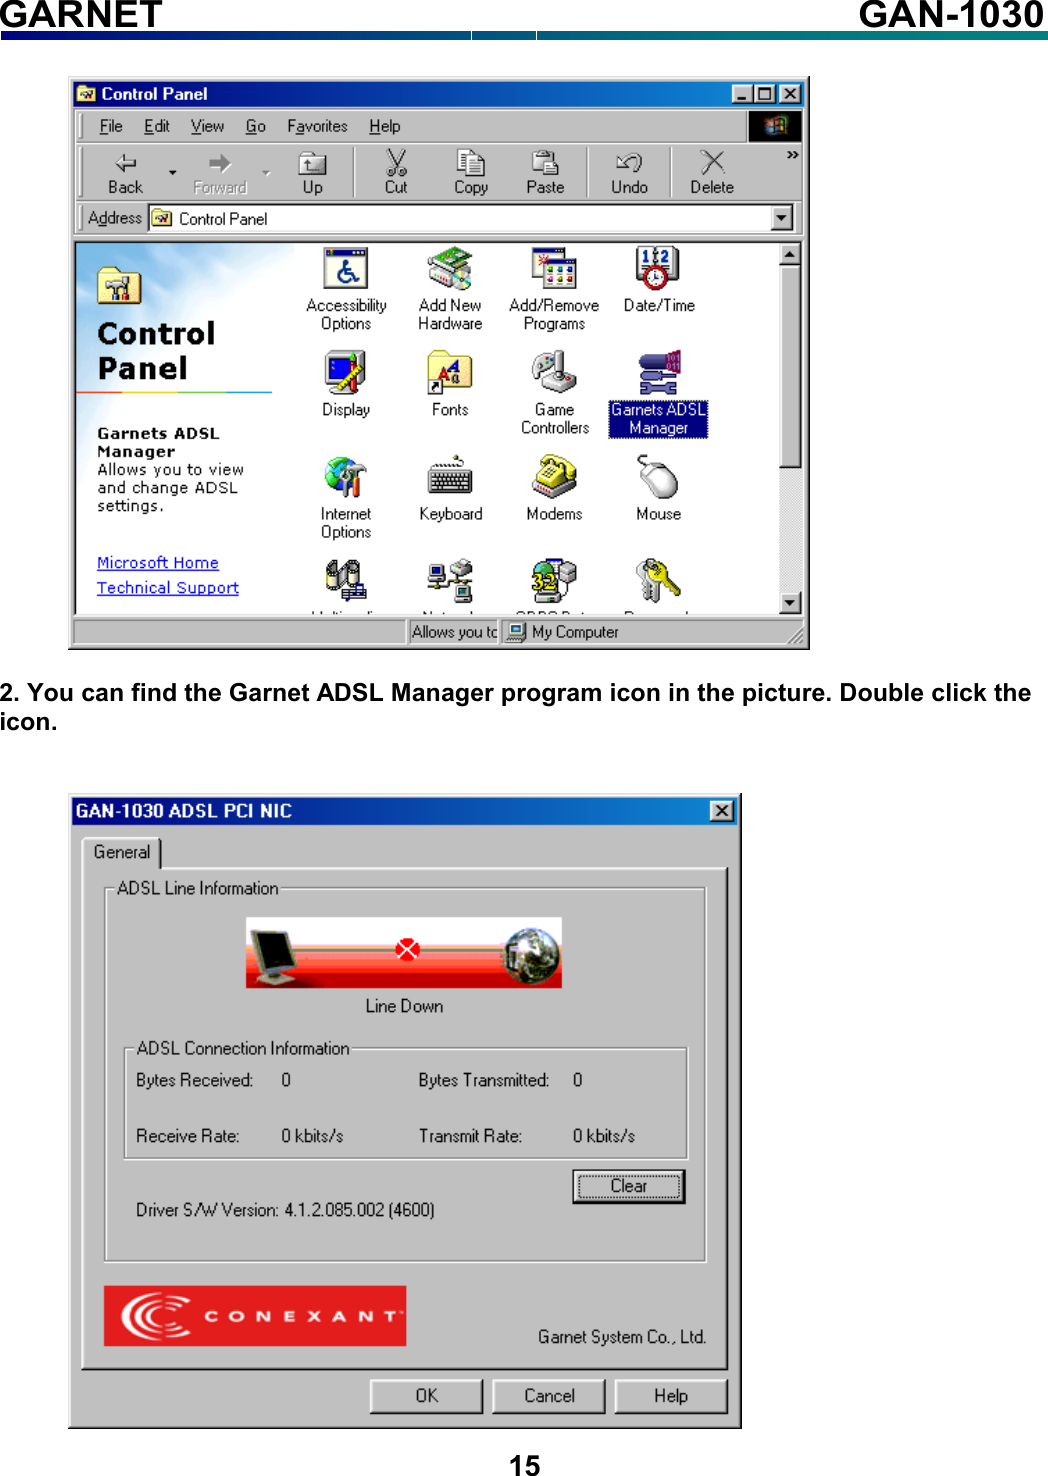   15    GARNET GAN-1030   2. You can find the Garnet ADSL Manager program icon in the picture. Double click the icon.    